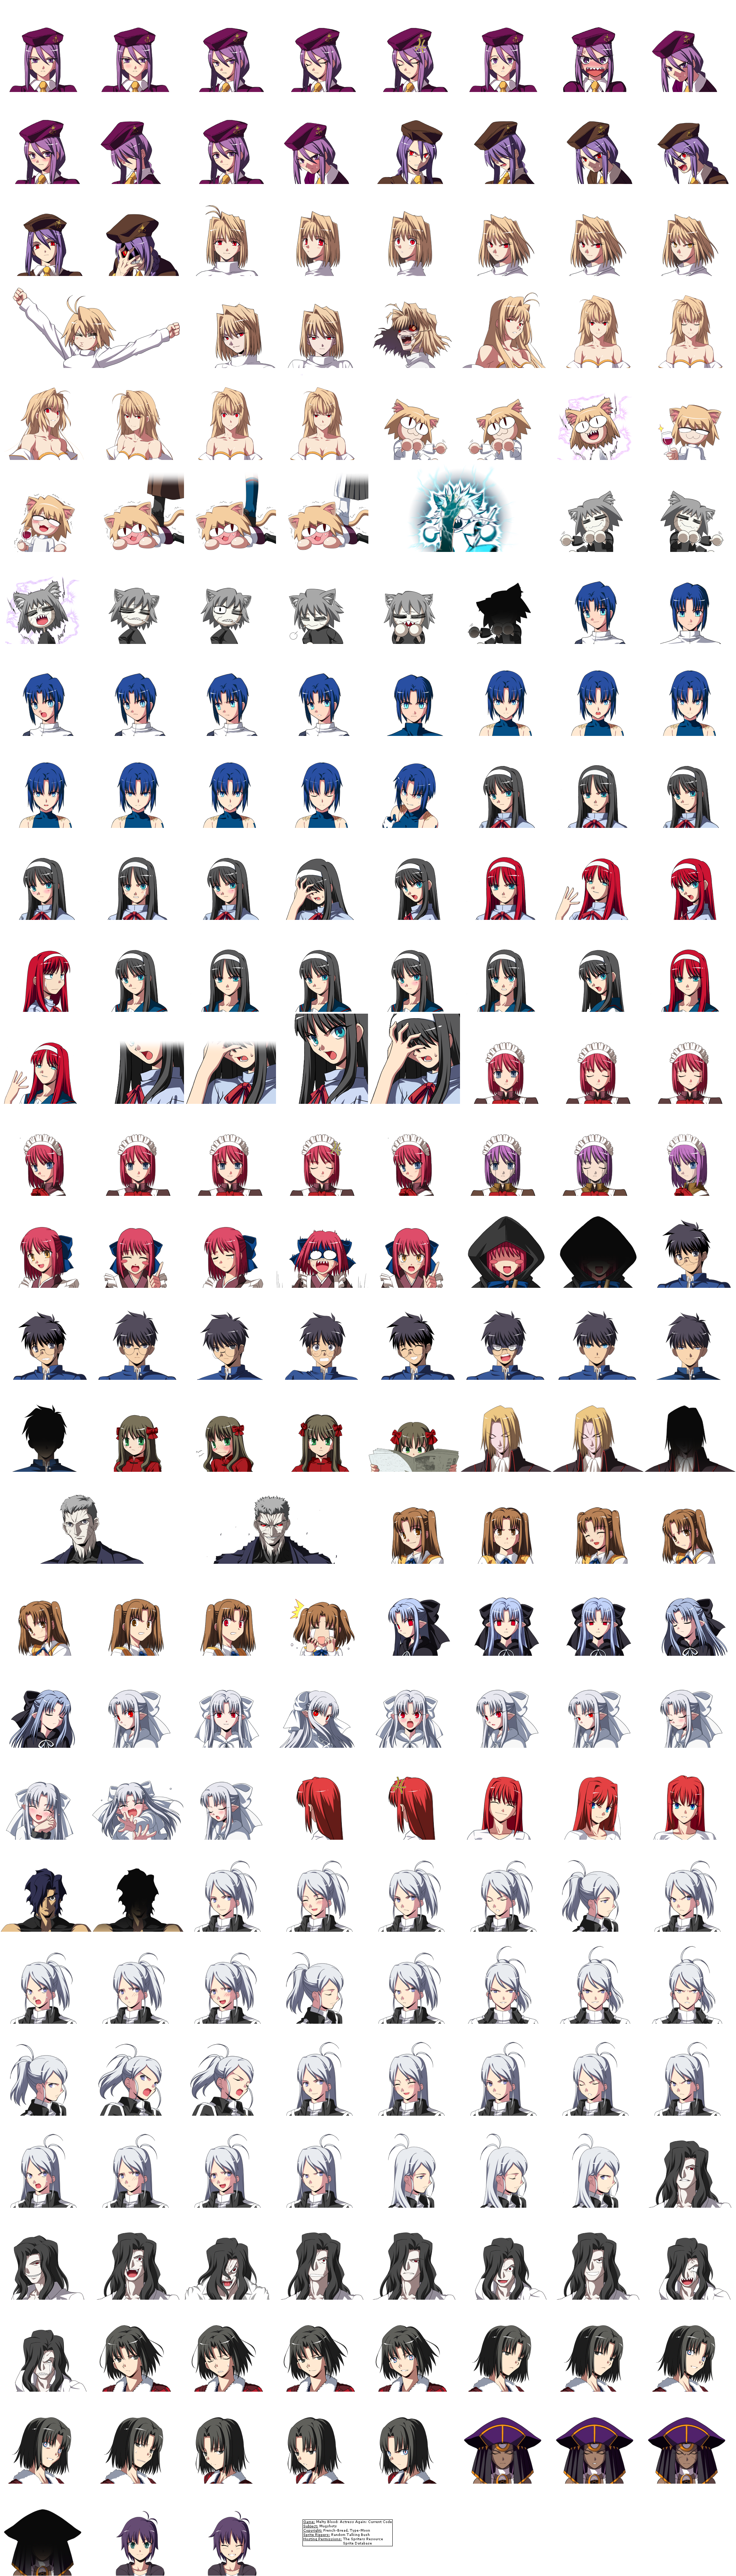 Melty Blood: Actress Again: Current Code. 